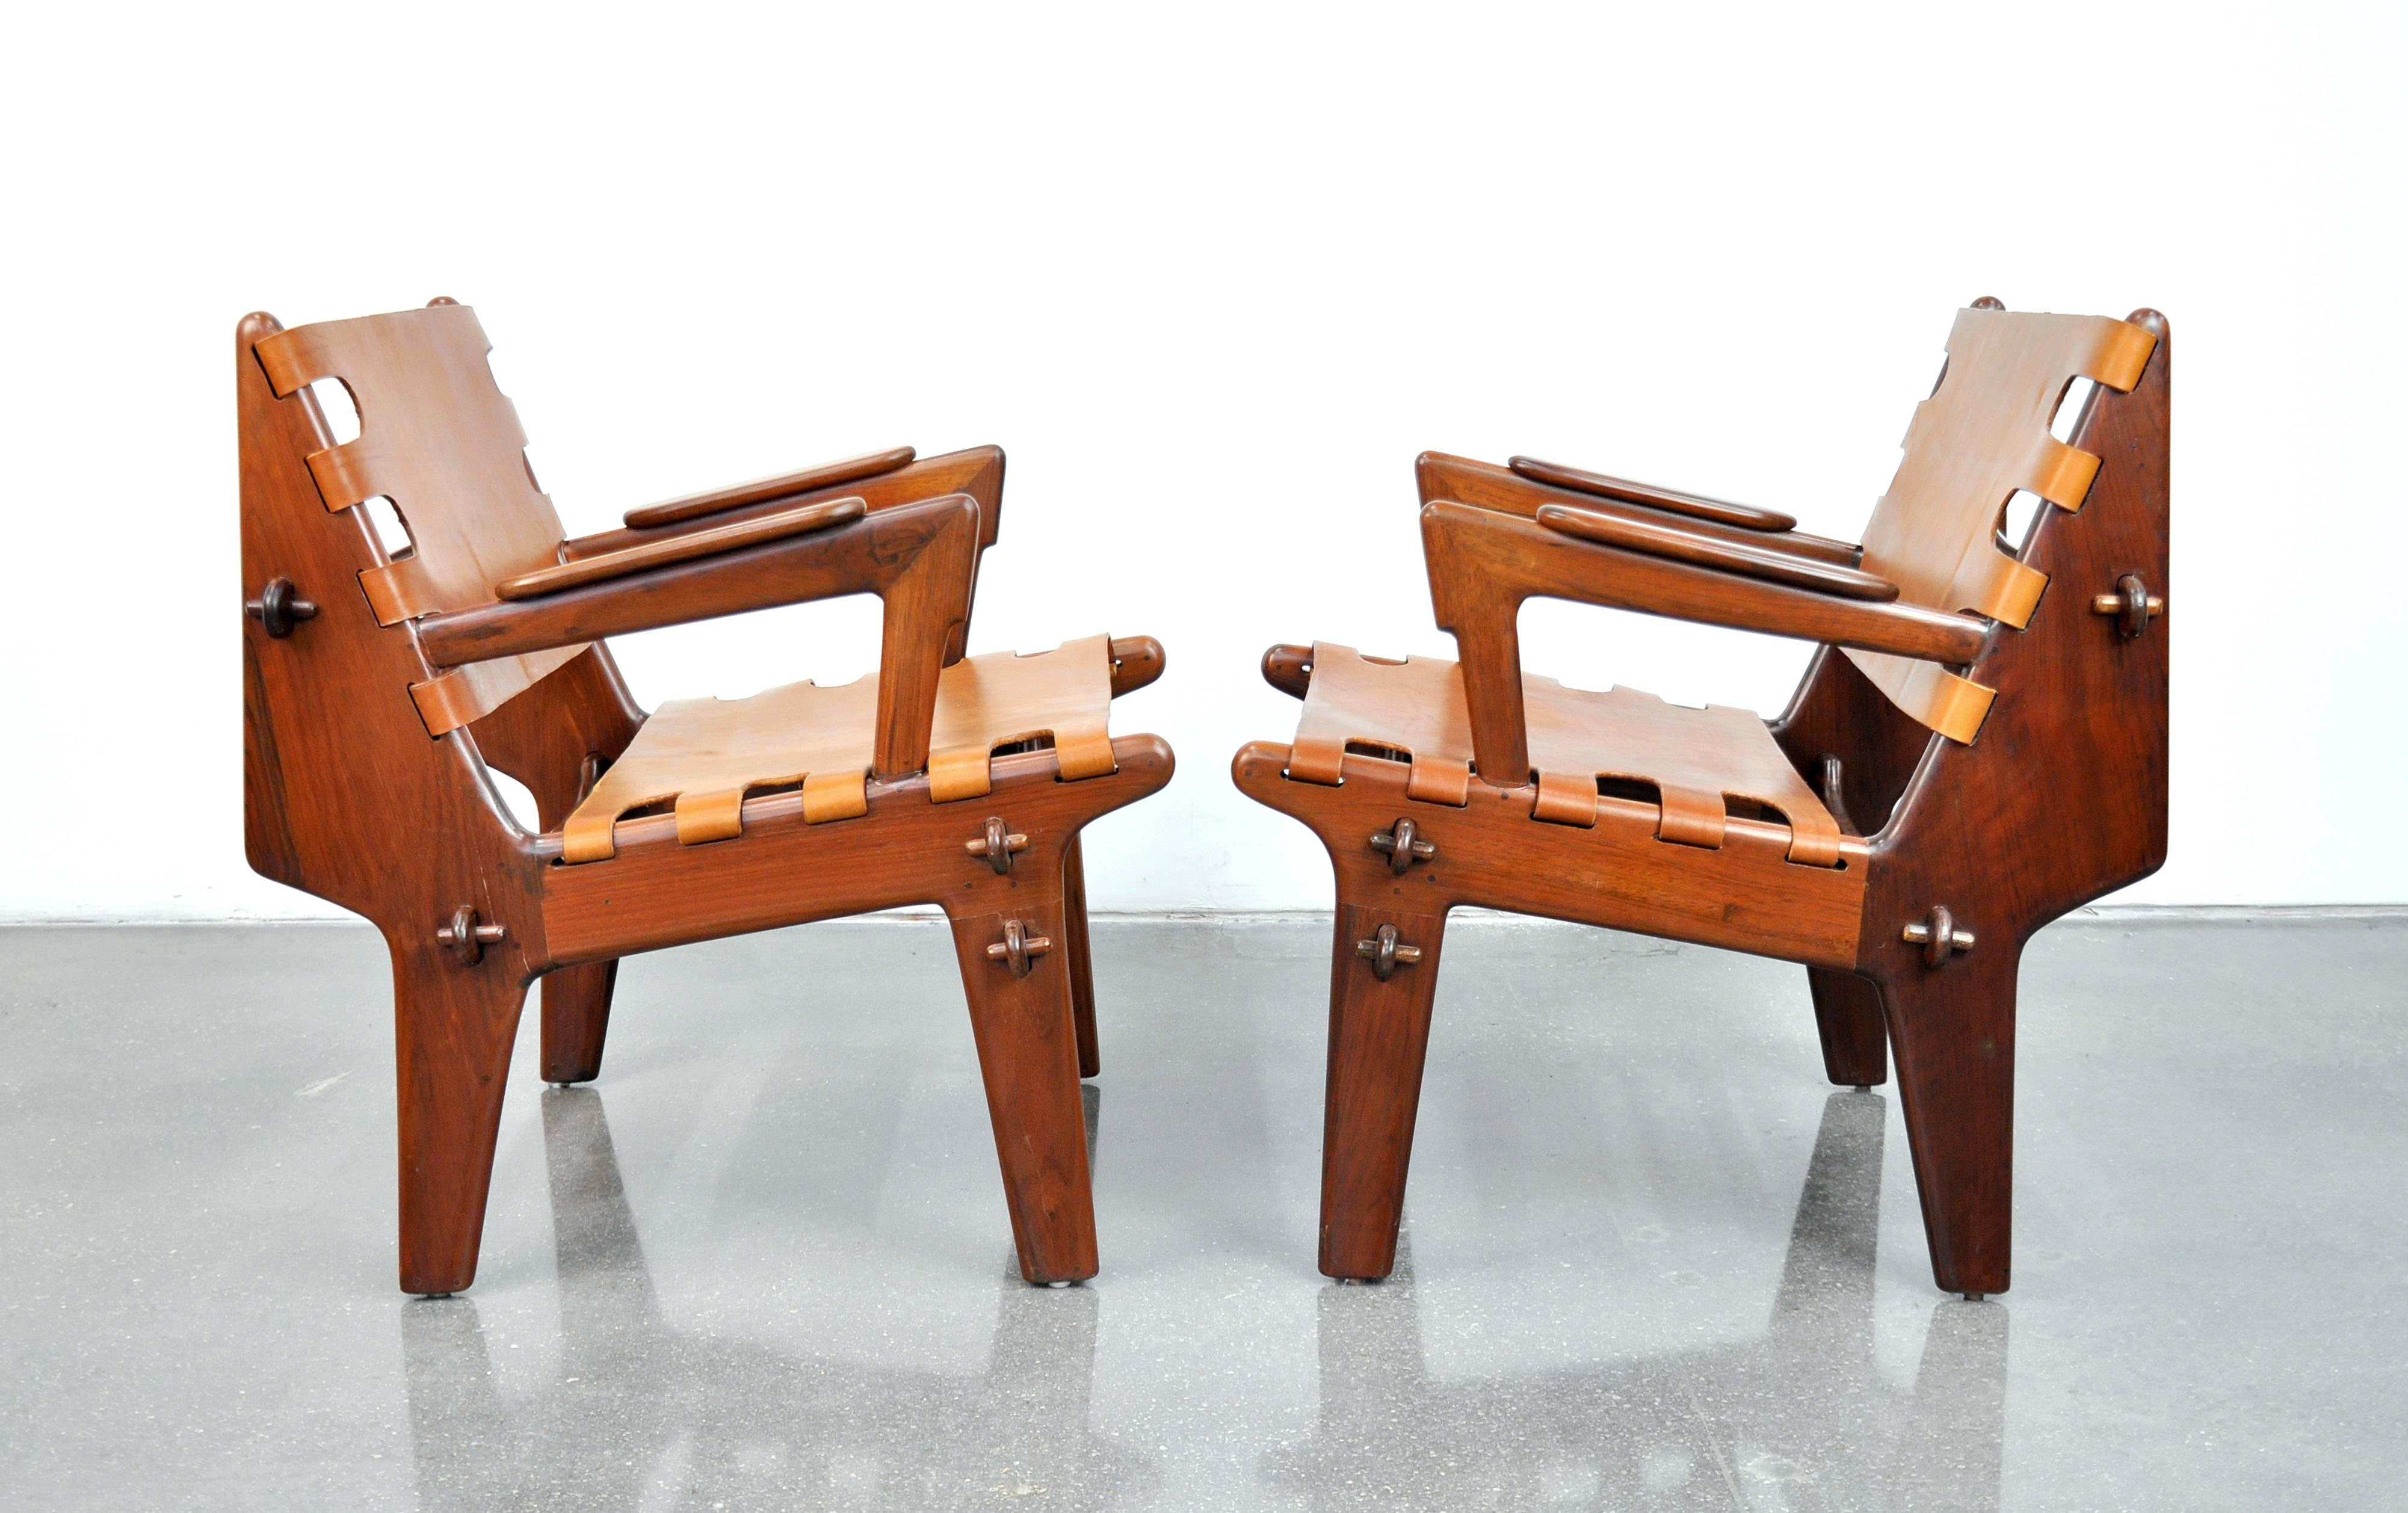 Amazing pair of vintage Mid-Century Modern safari style easy lounge chairs by Ecuadorian designer Angel Pazmino. The sculptural rosewood frames are slung with newer caramel colored leather and feature a wooden peg construction that allows the pieces